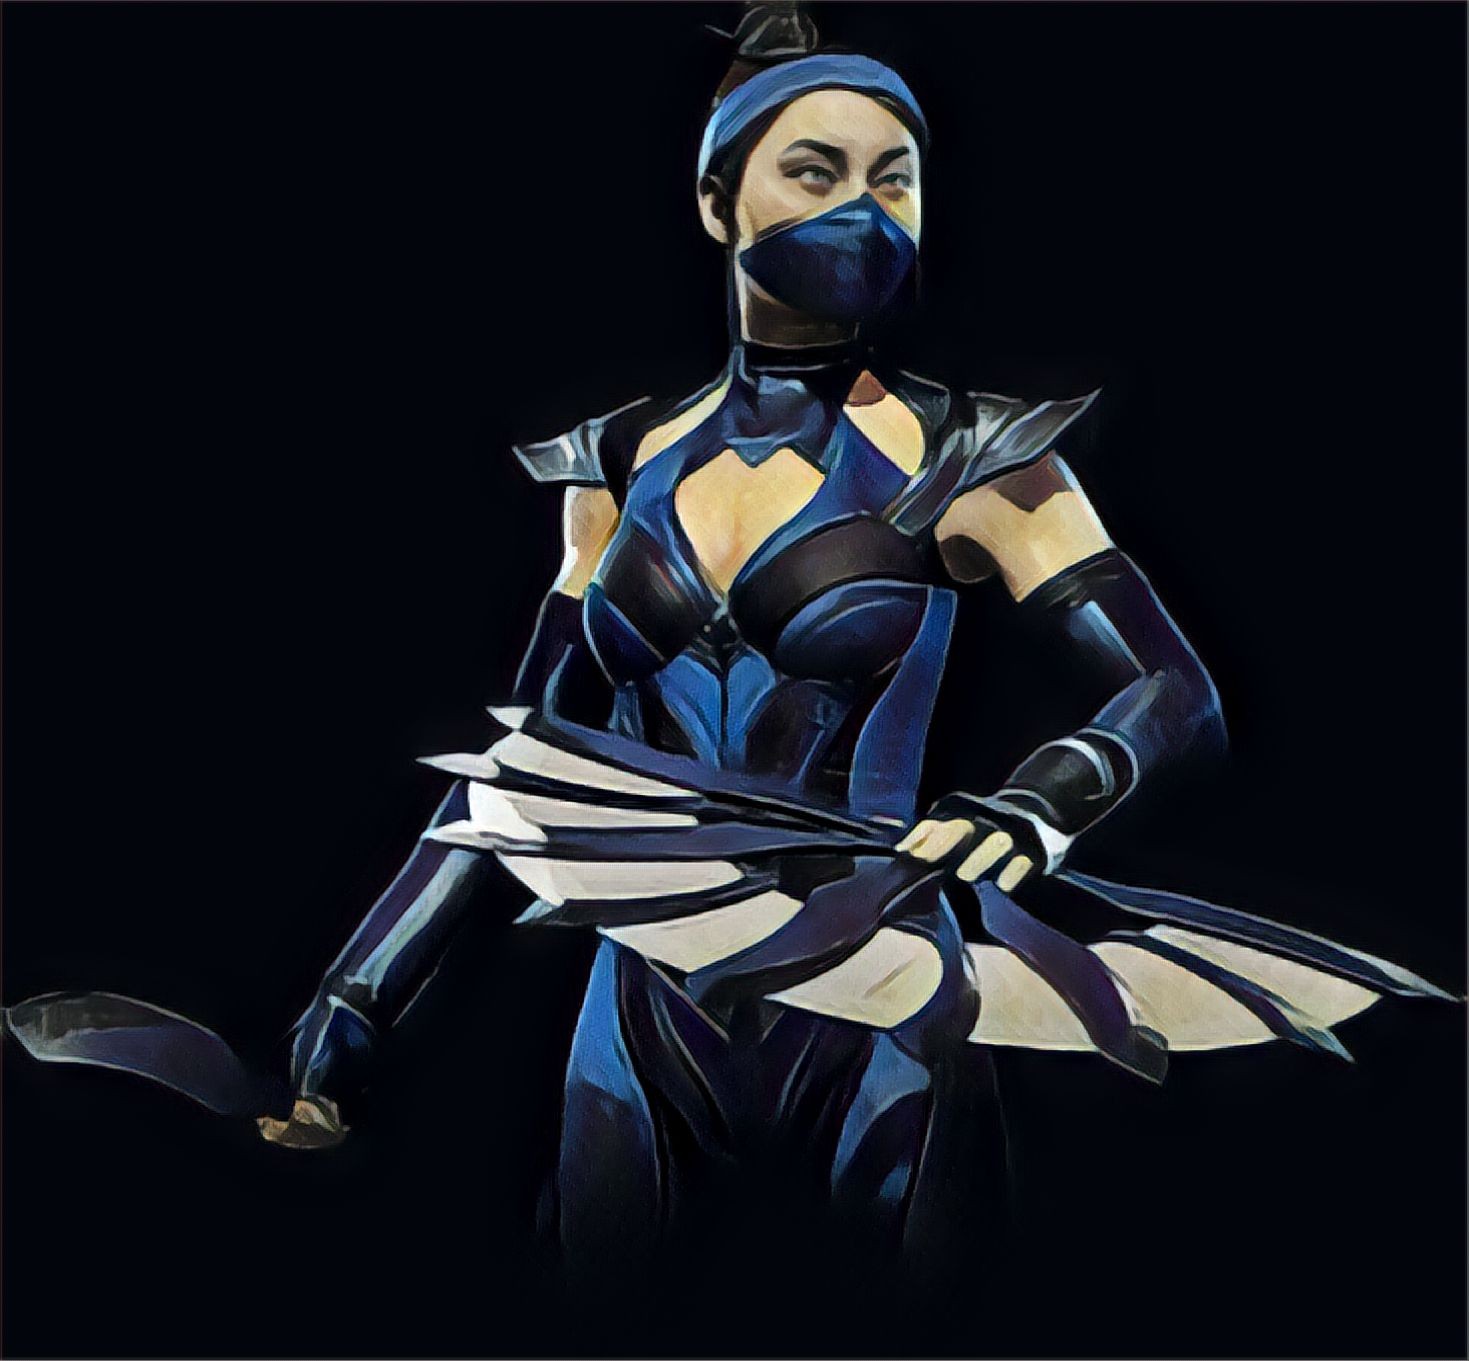 carissa amalia recommends pictures of kitana from mortal kombat pic